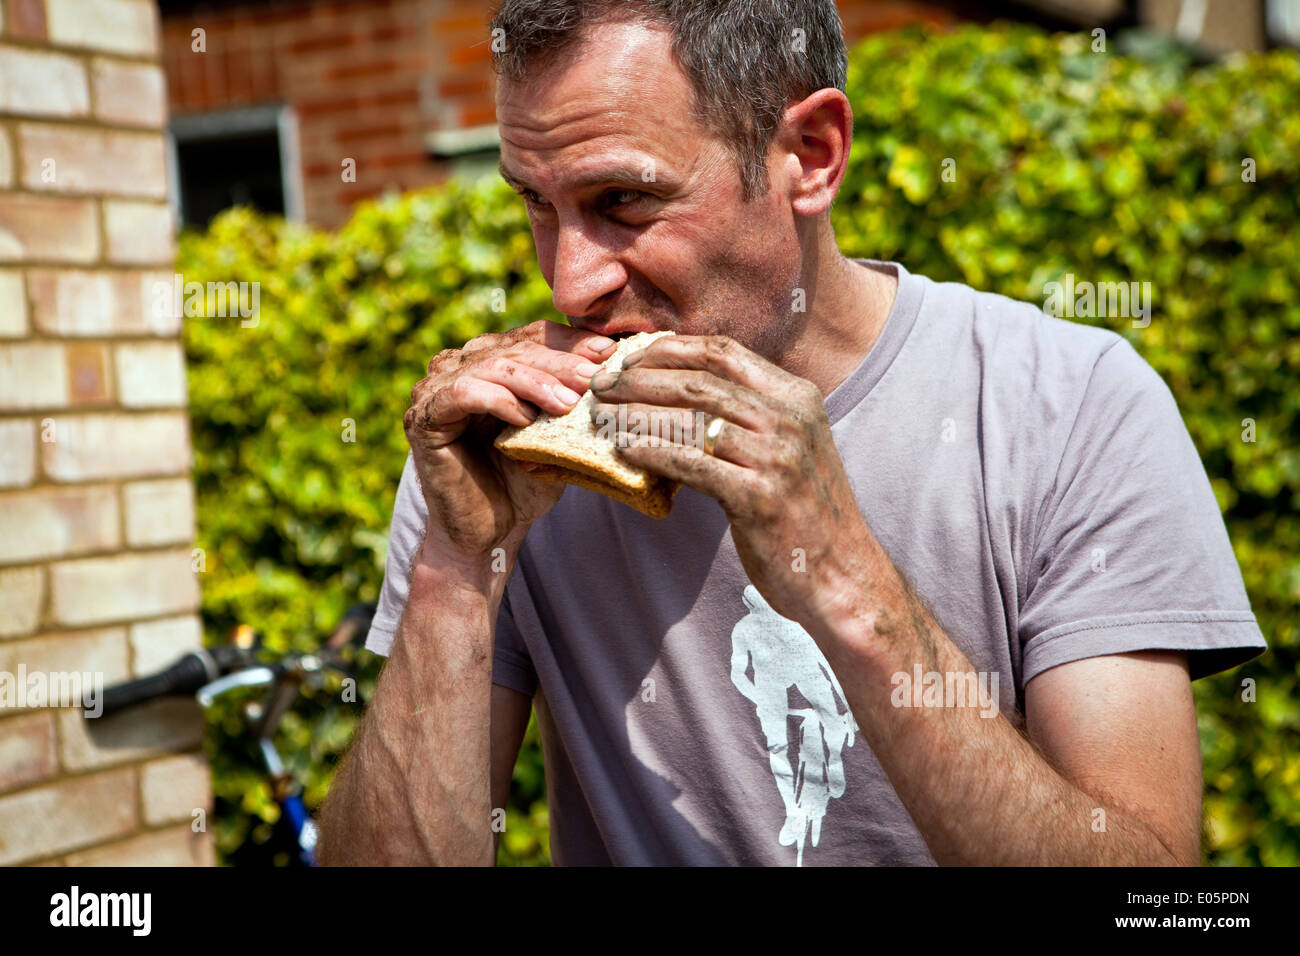 Man eating sandwich with dirty hands Stock Photo